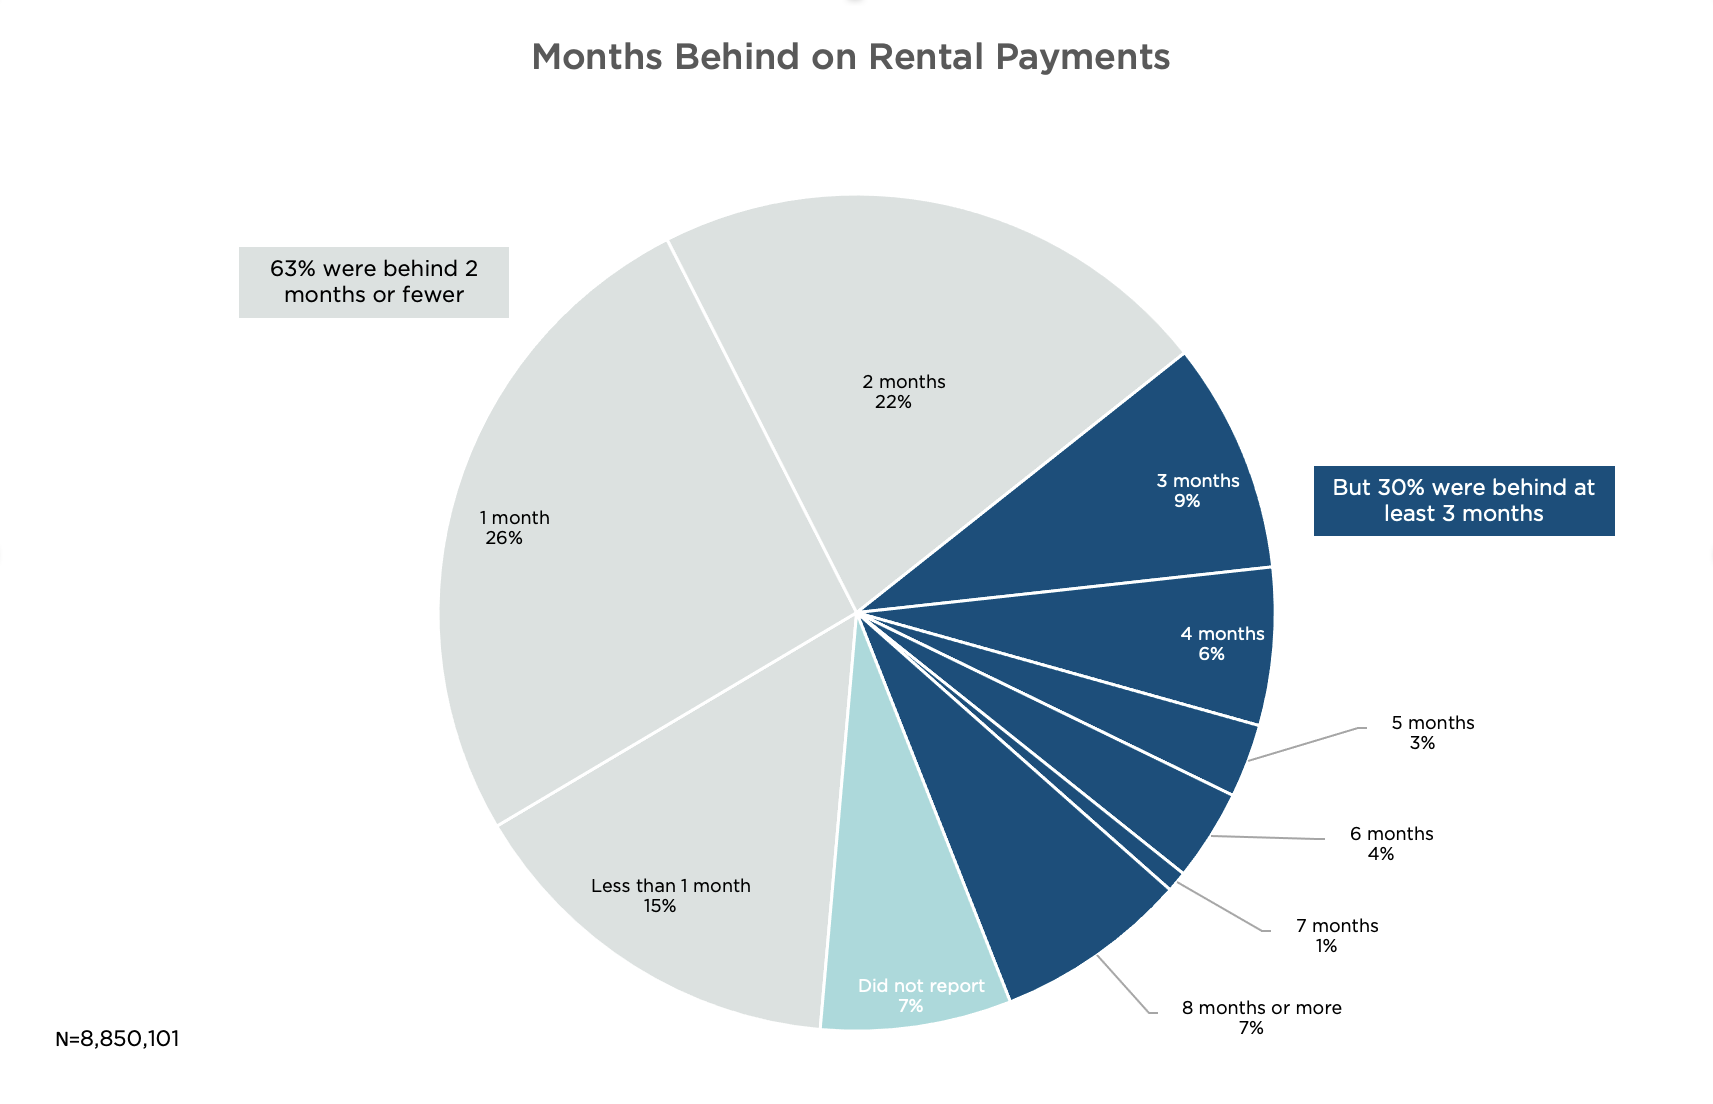 Chart showing how 63% of individuals were behind 2 months or fewer on rental payments, while 30% were behind at least 3 months